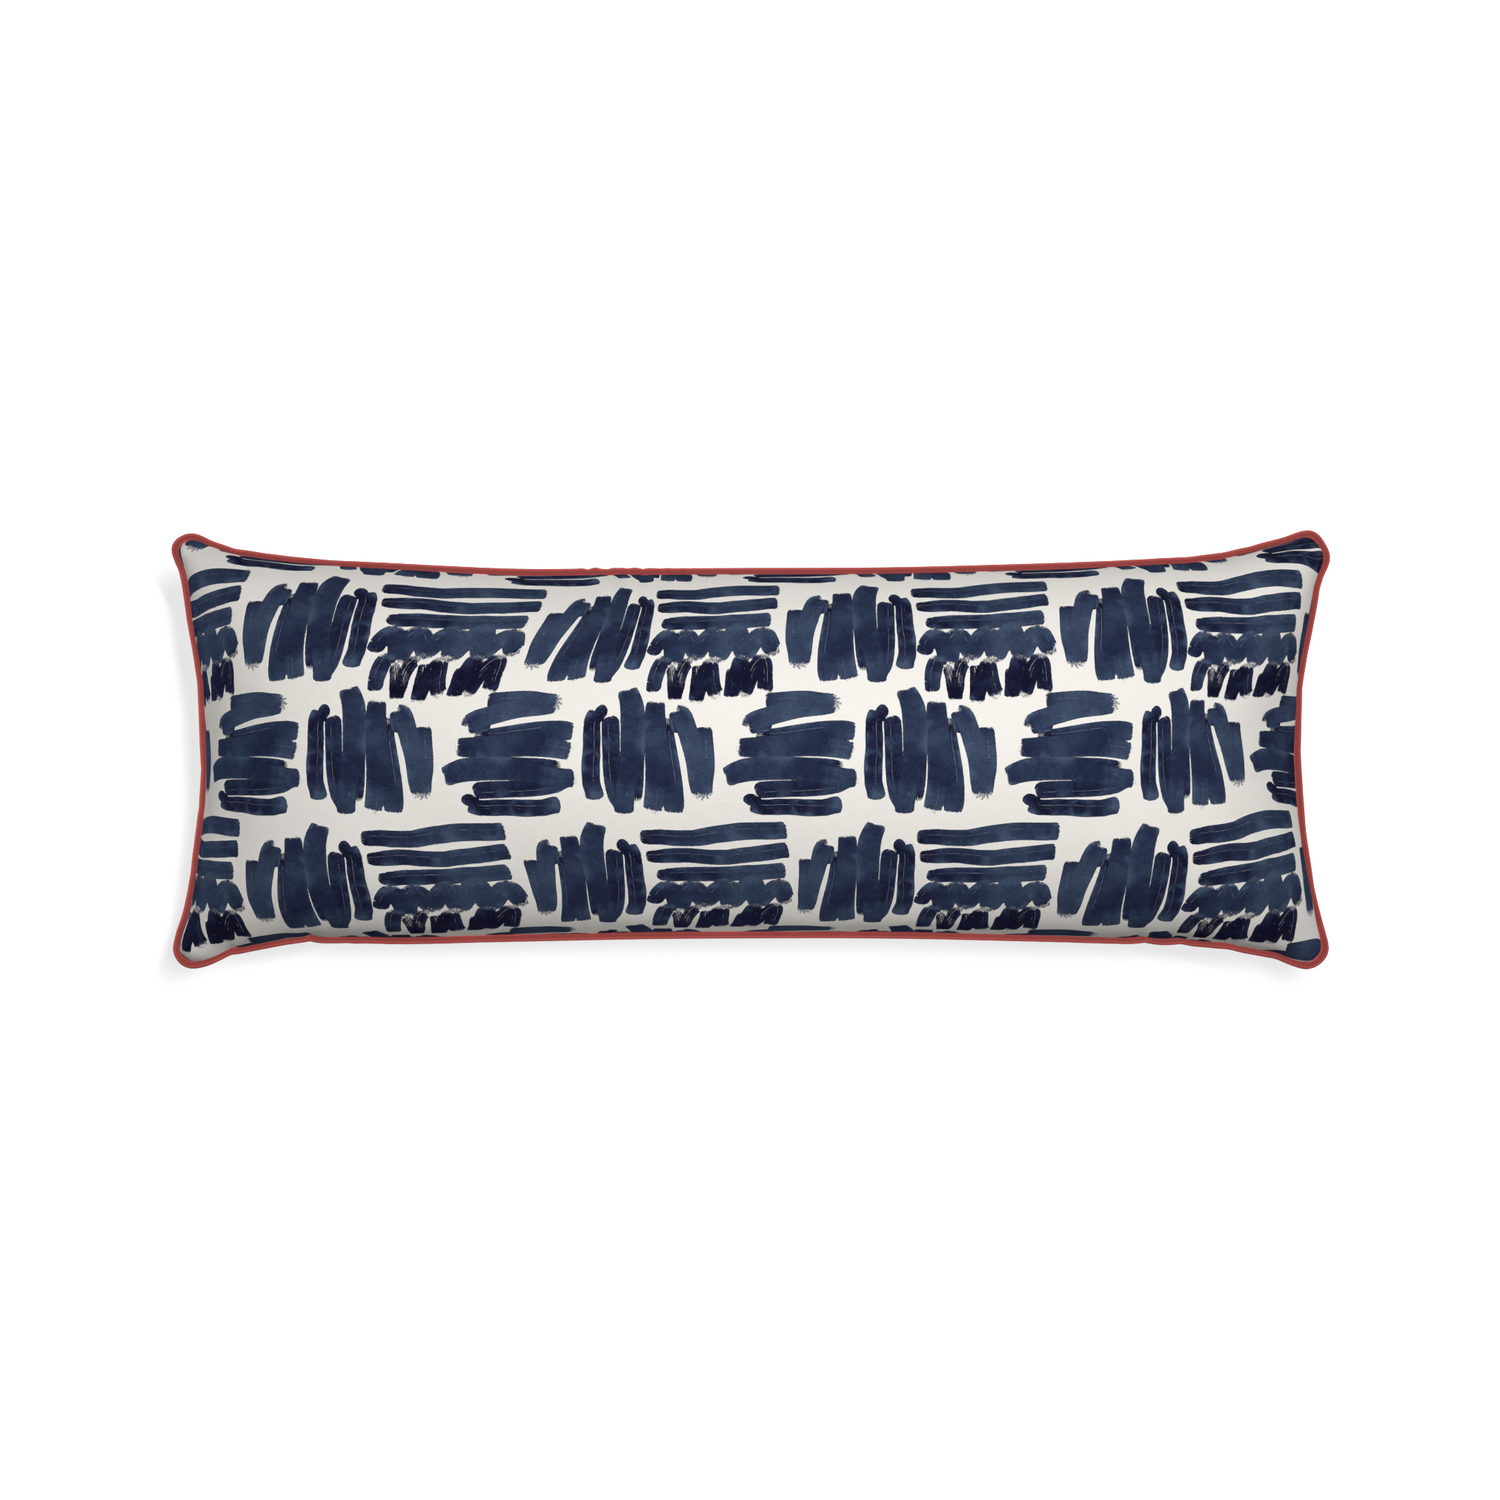 Xl-lumbar warby custom pillow with c piping on white background